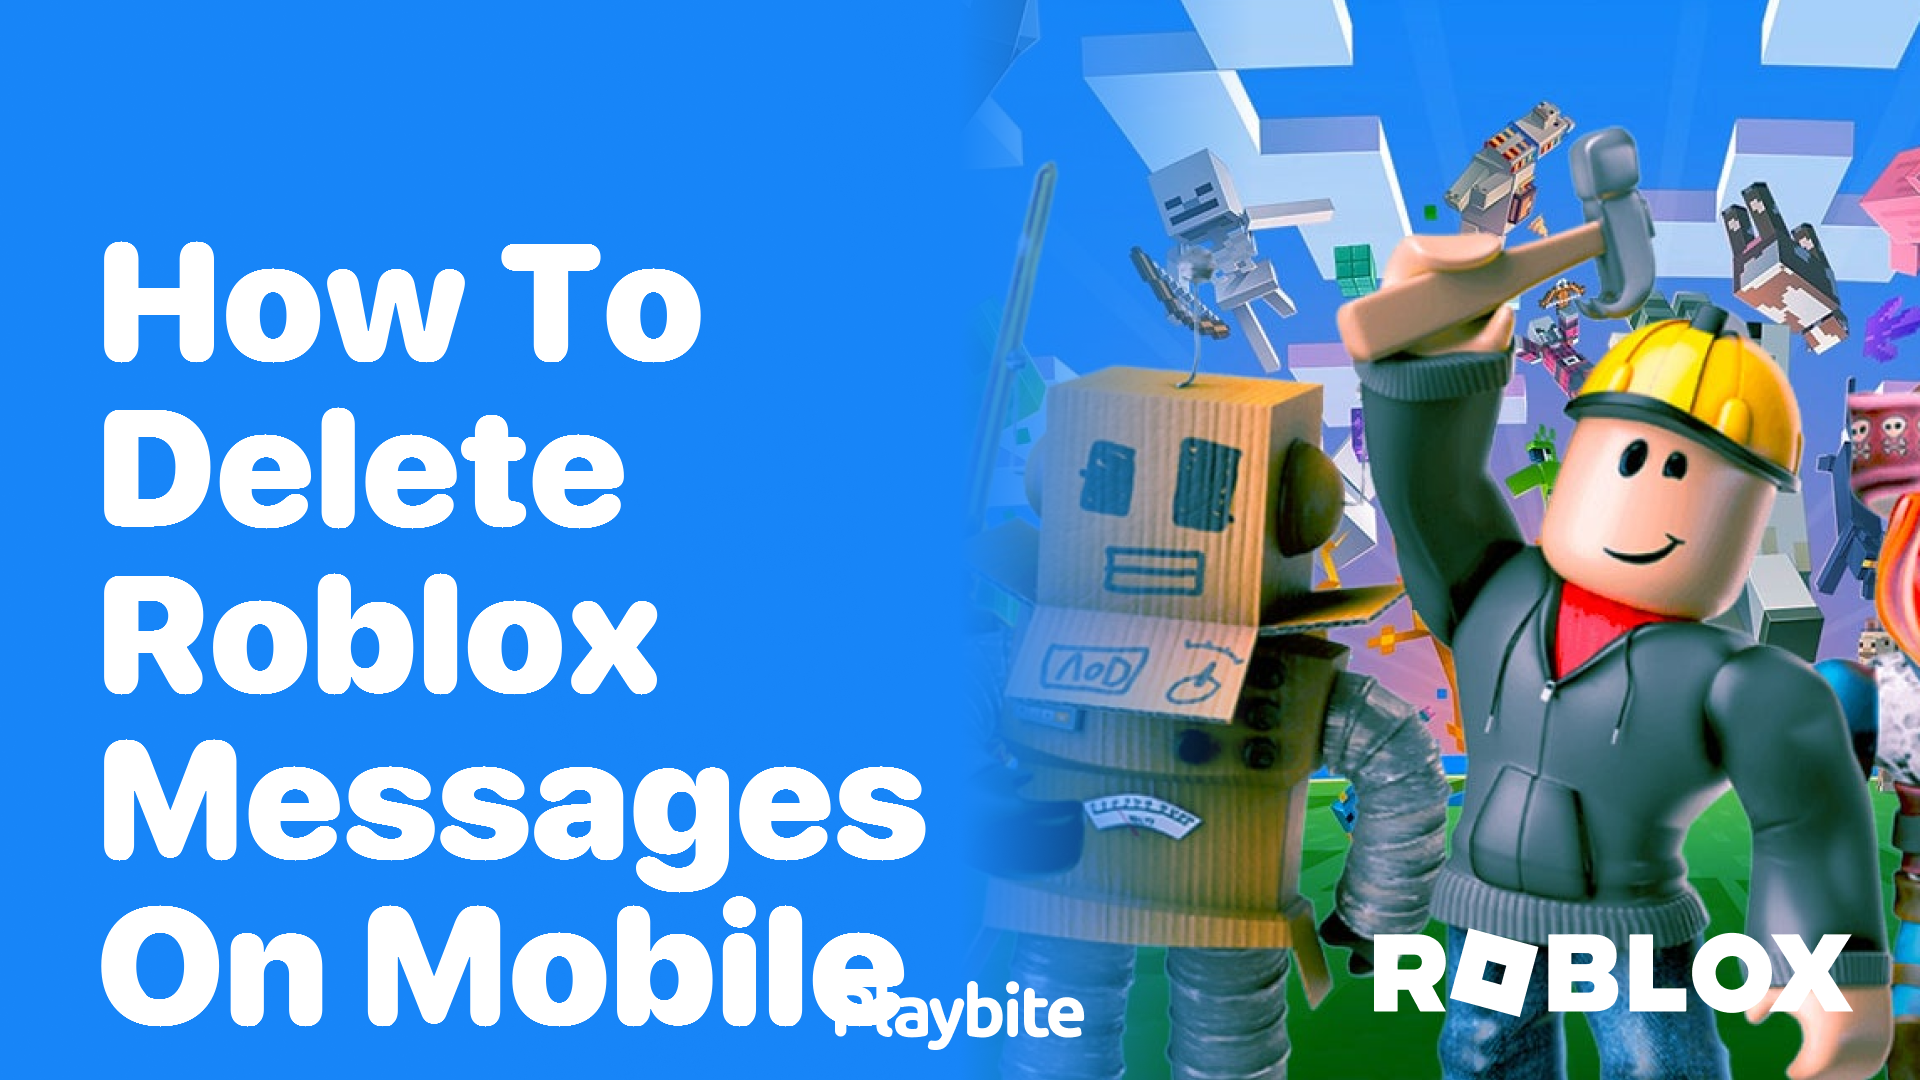 How to Delete Roblox Messages on Mobile: A Quick Guide